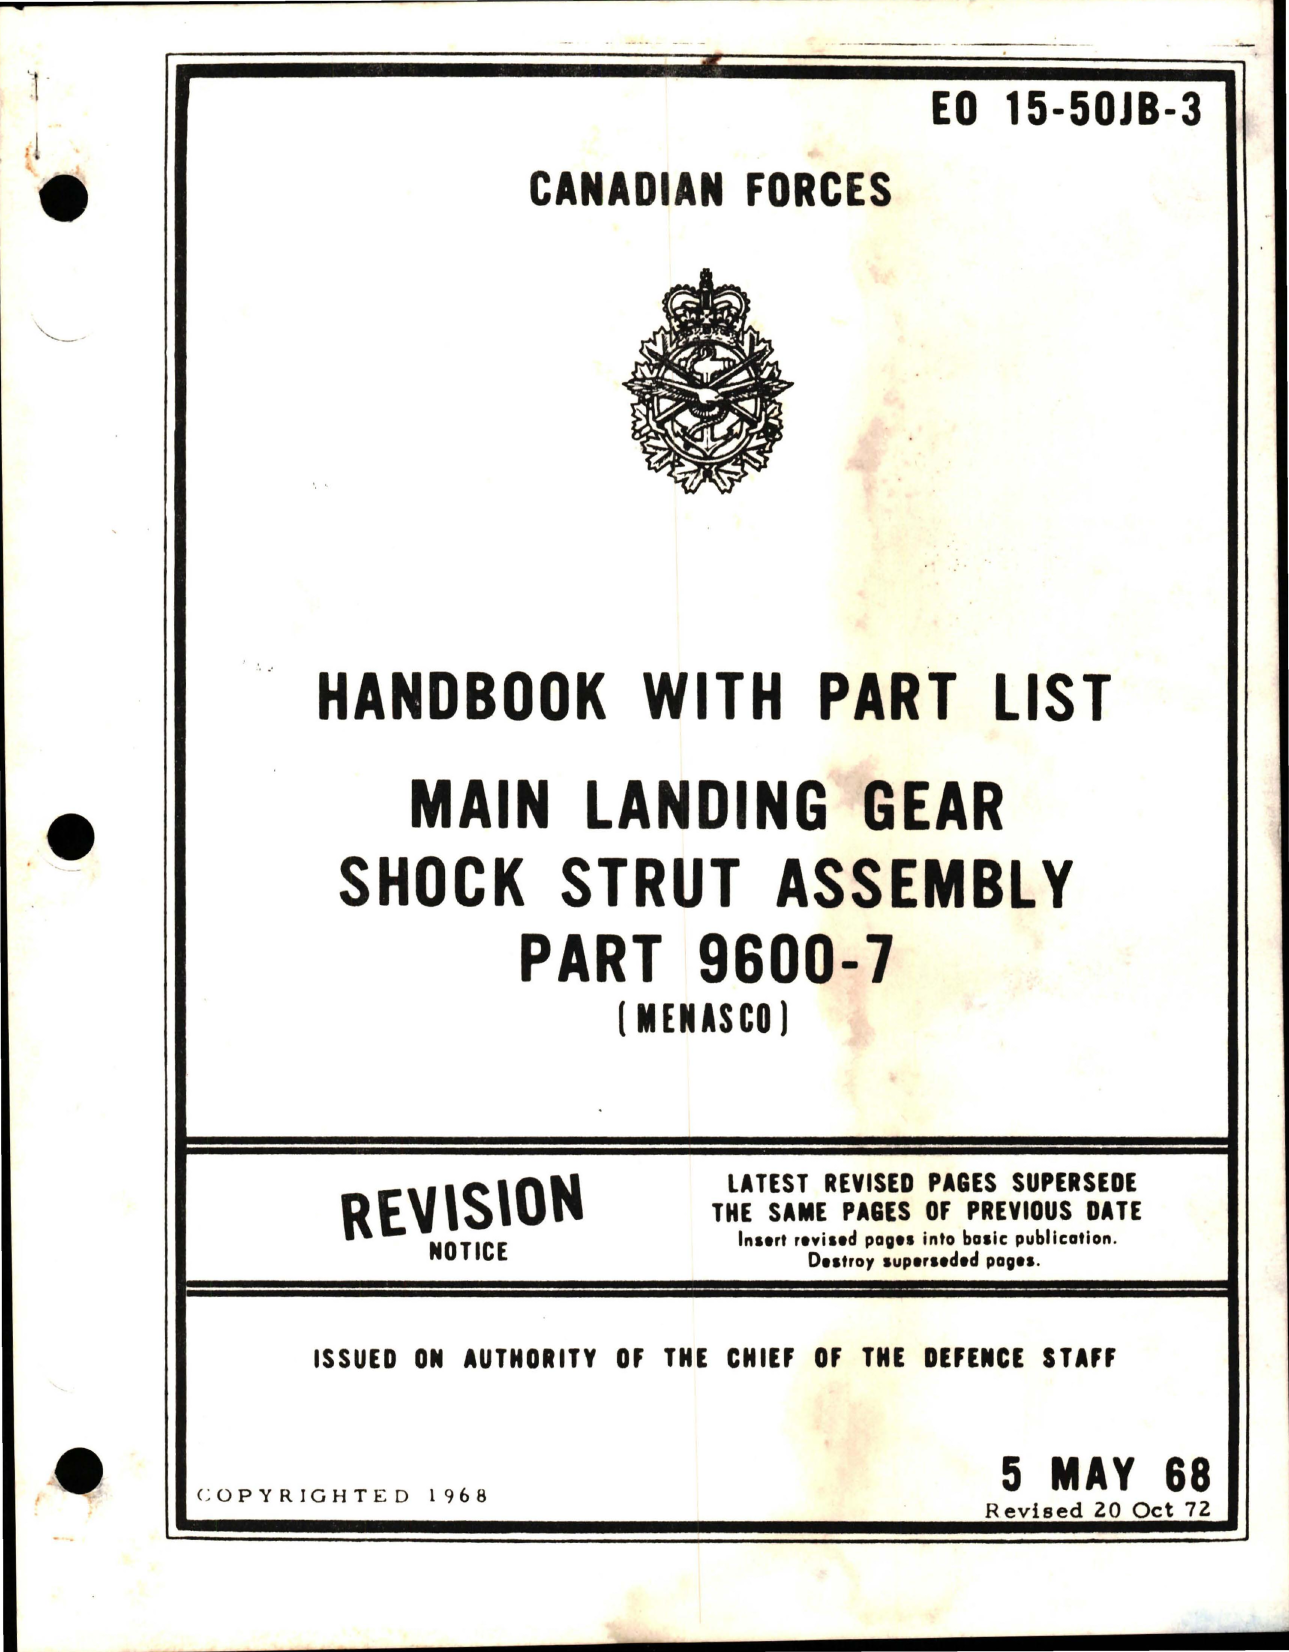 Sample page 1 from AirCorps Library document: Handbook w Part List for Main Landing Gear Shock Strut Assembly - Part 9600-7